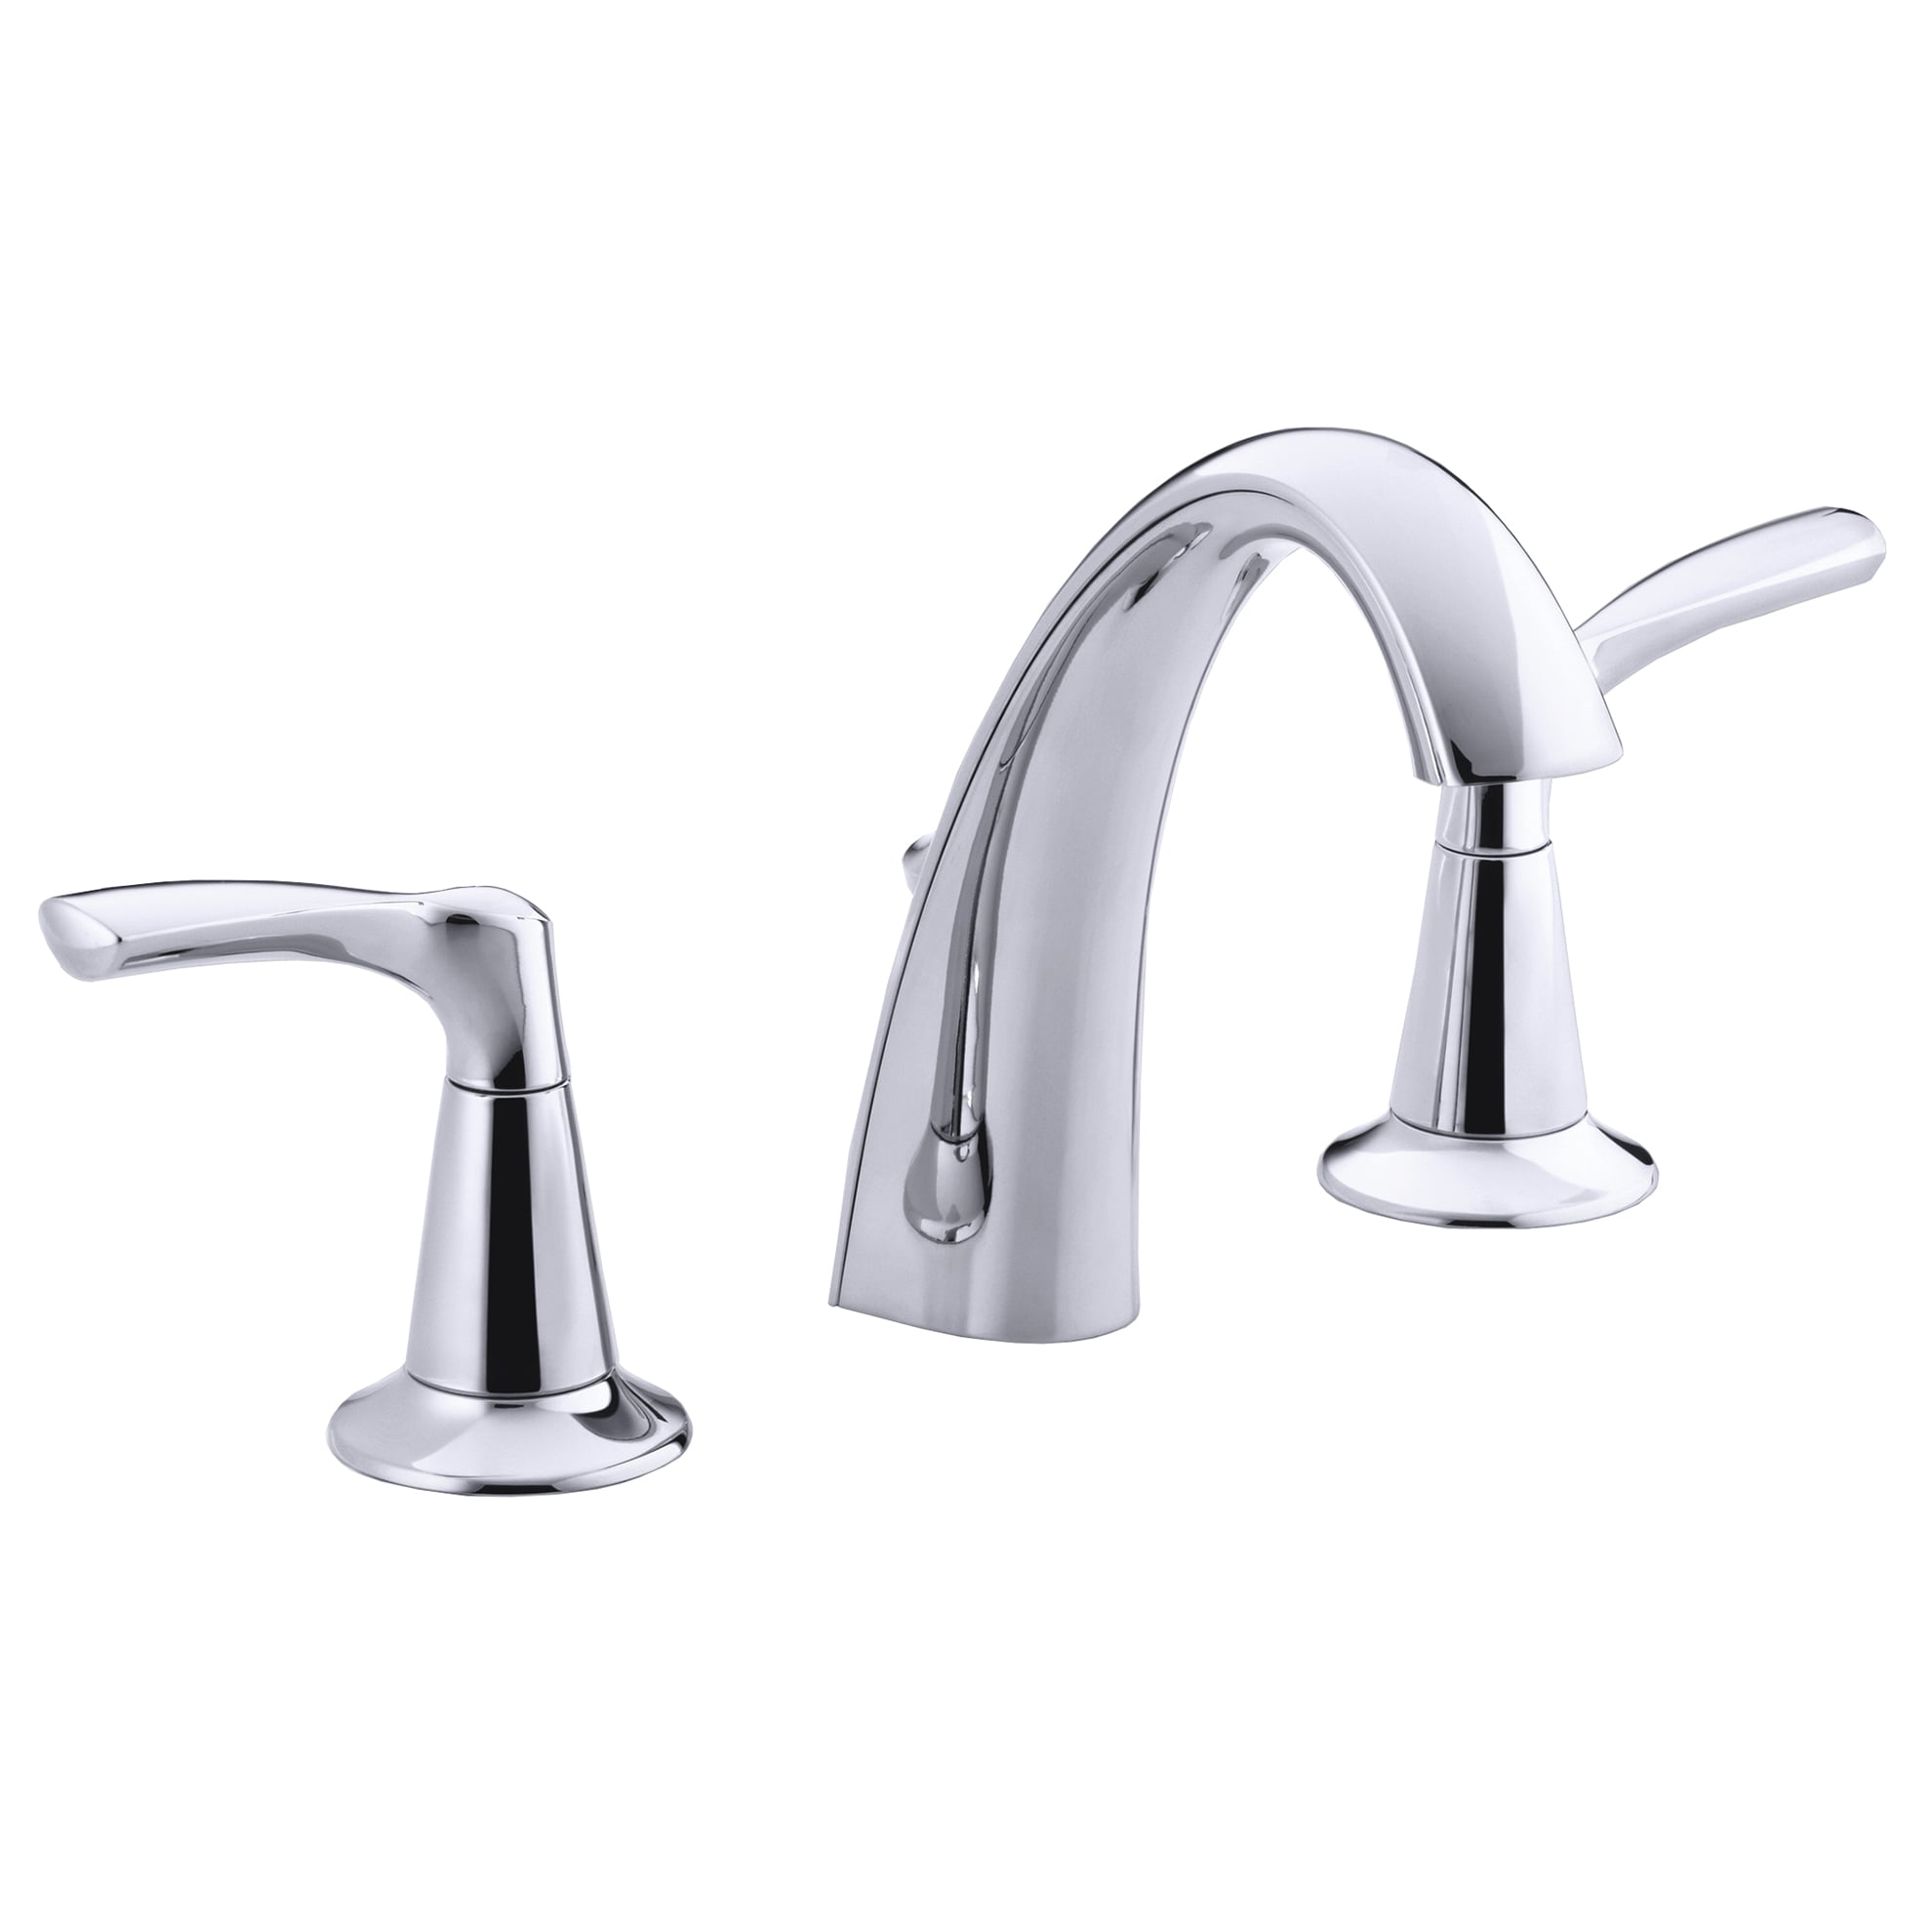 4717674 8 To 16 In. Mistos Widespread Lavatory Faucet - Polished Chrome